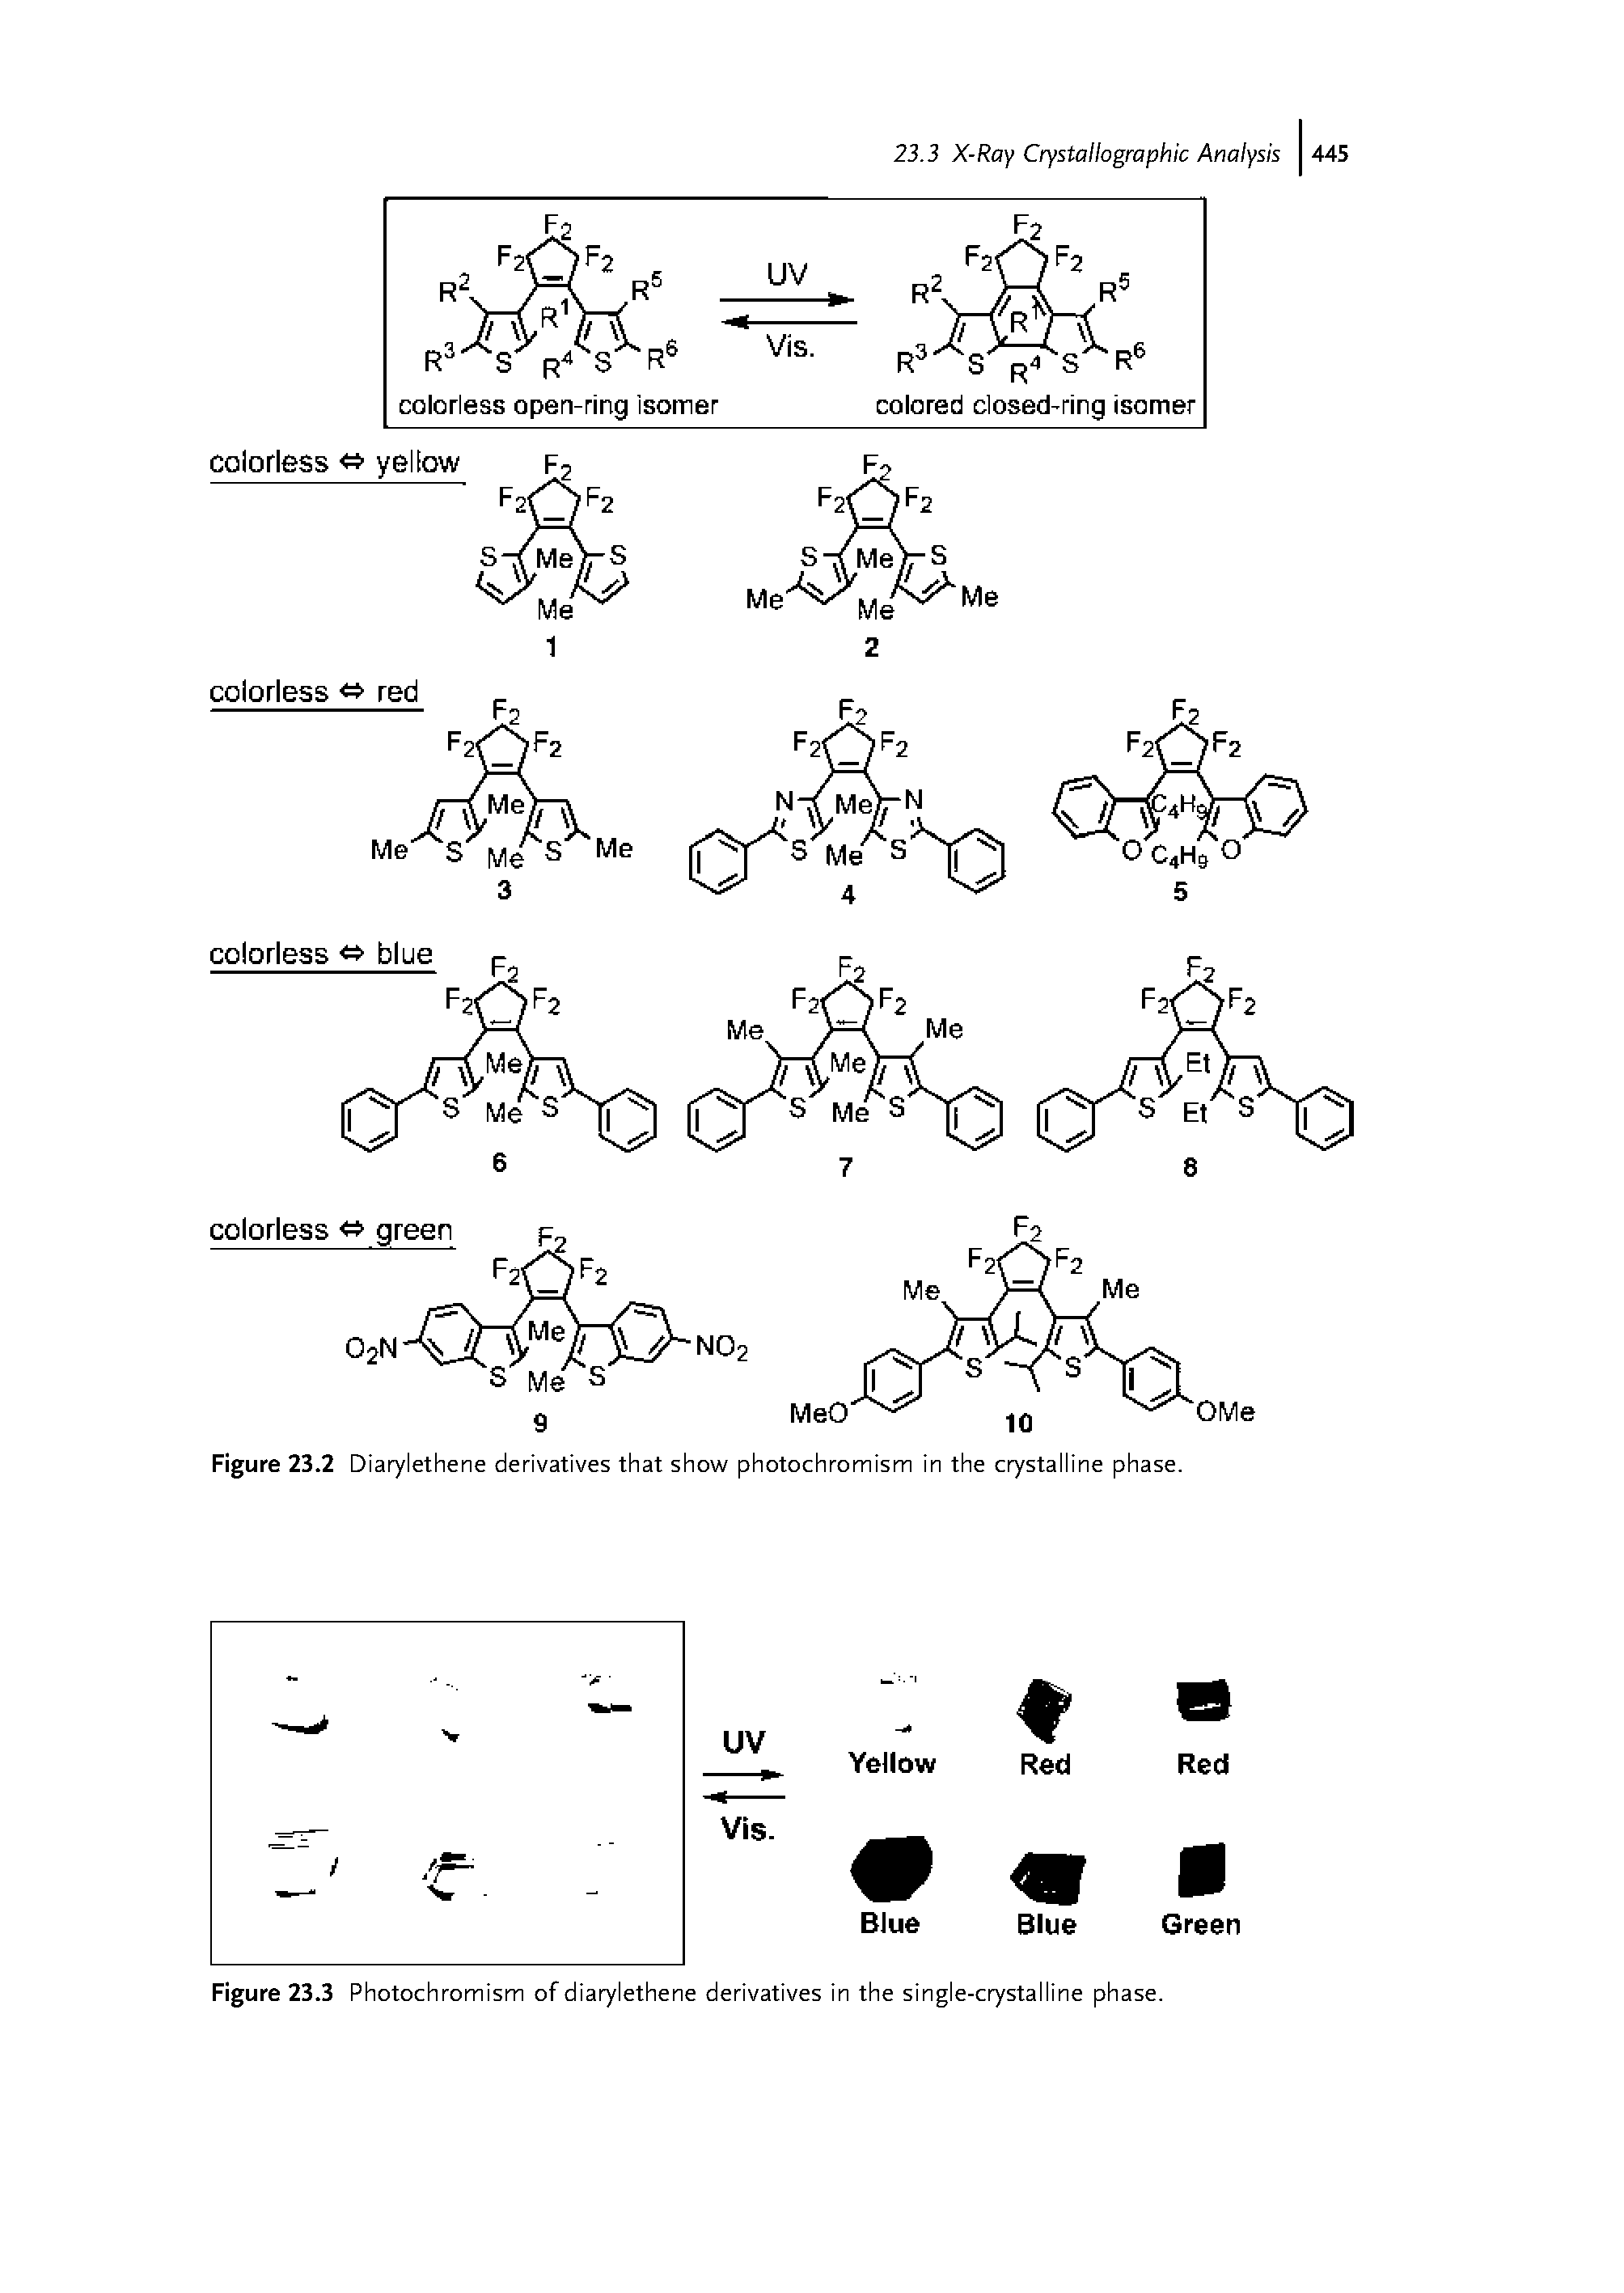 Figure 23.2 Diarylethene derivatives that show photochromism in the crystalline phase.